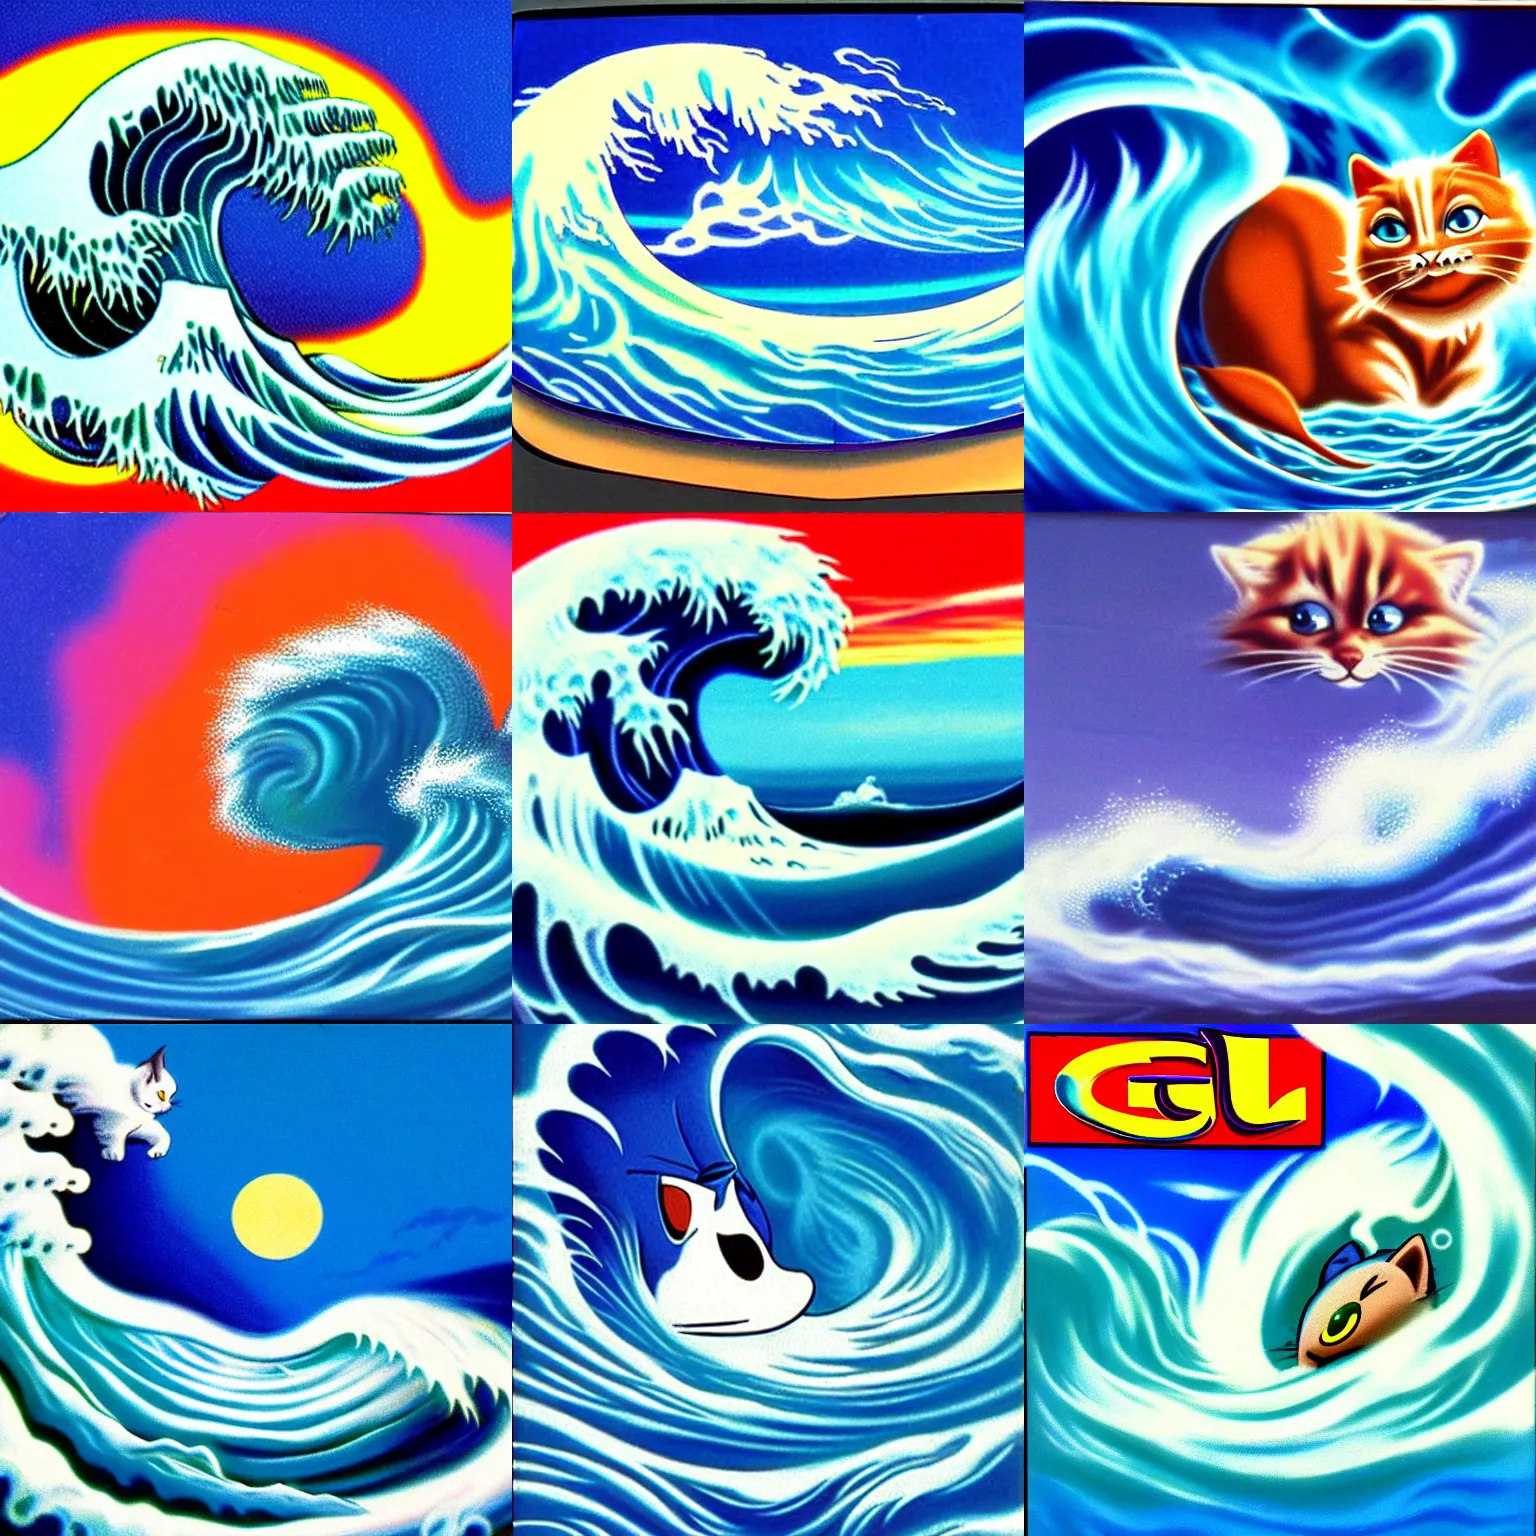 Prompt: surreal, professional, high quality airbrush art of a blue cresting ocean wave in the shape of a vintage animation cartoon cat, 1990s 1992 Sega Genesis box art